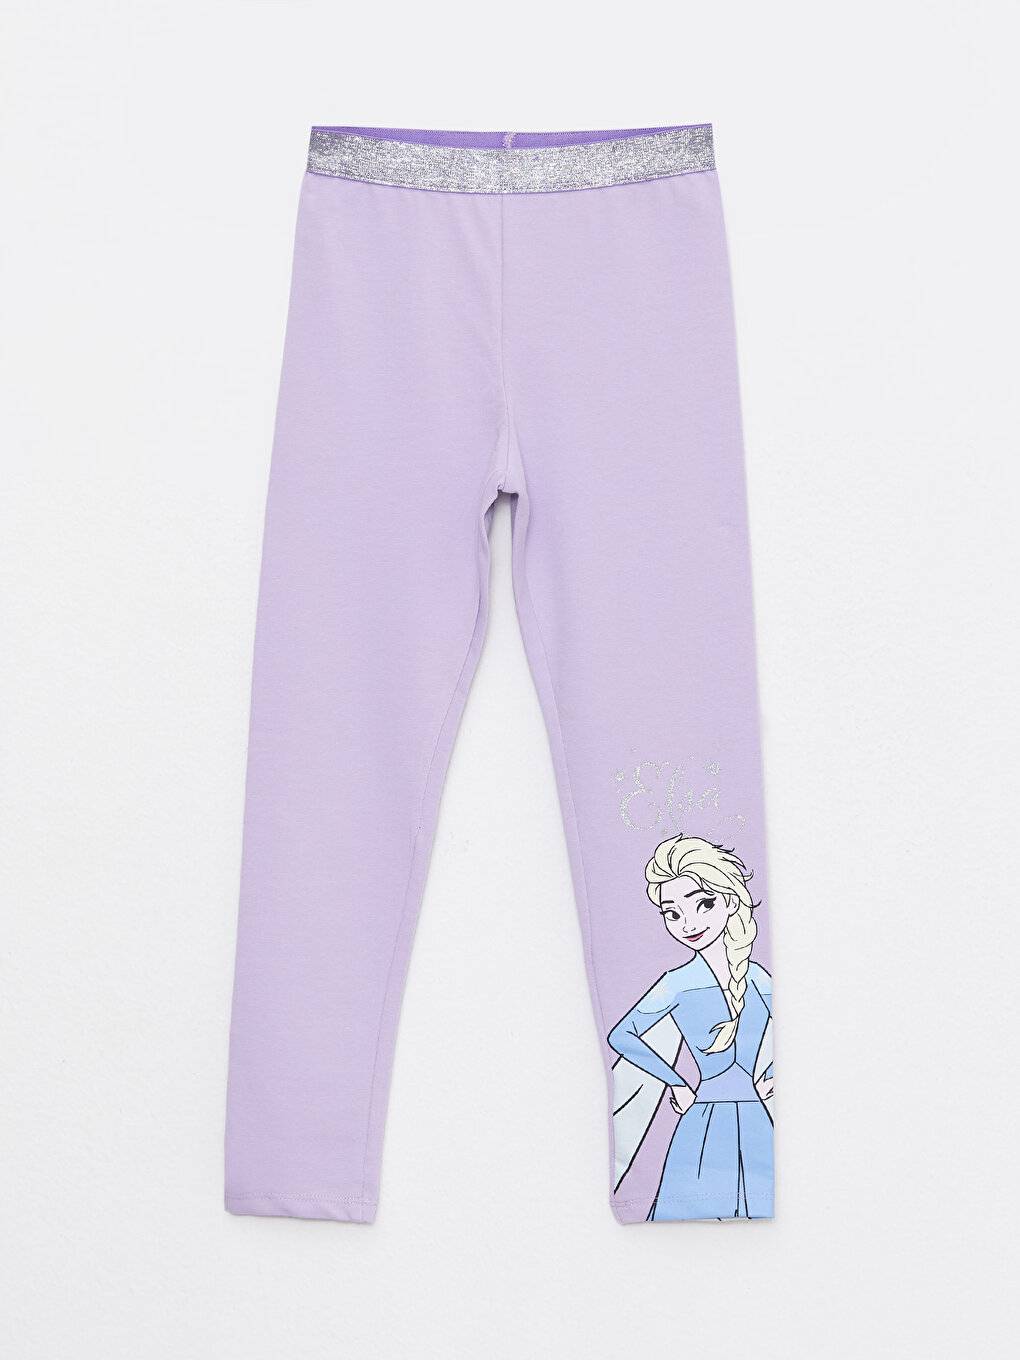 Amazon.com: Disney Frozen 2 Sweatshirt for Girls, Elsa, Olaf and Anna  Purple and Pink Plush Pullover: Clothing, Shoes & Jewelry